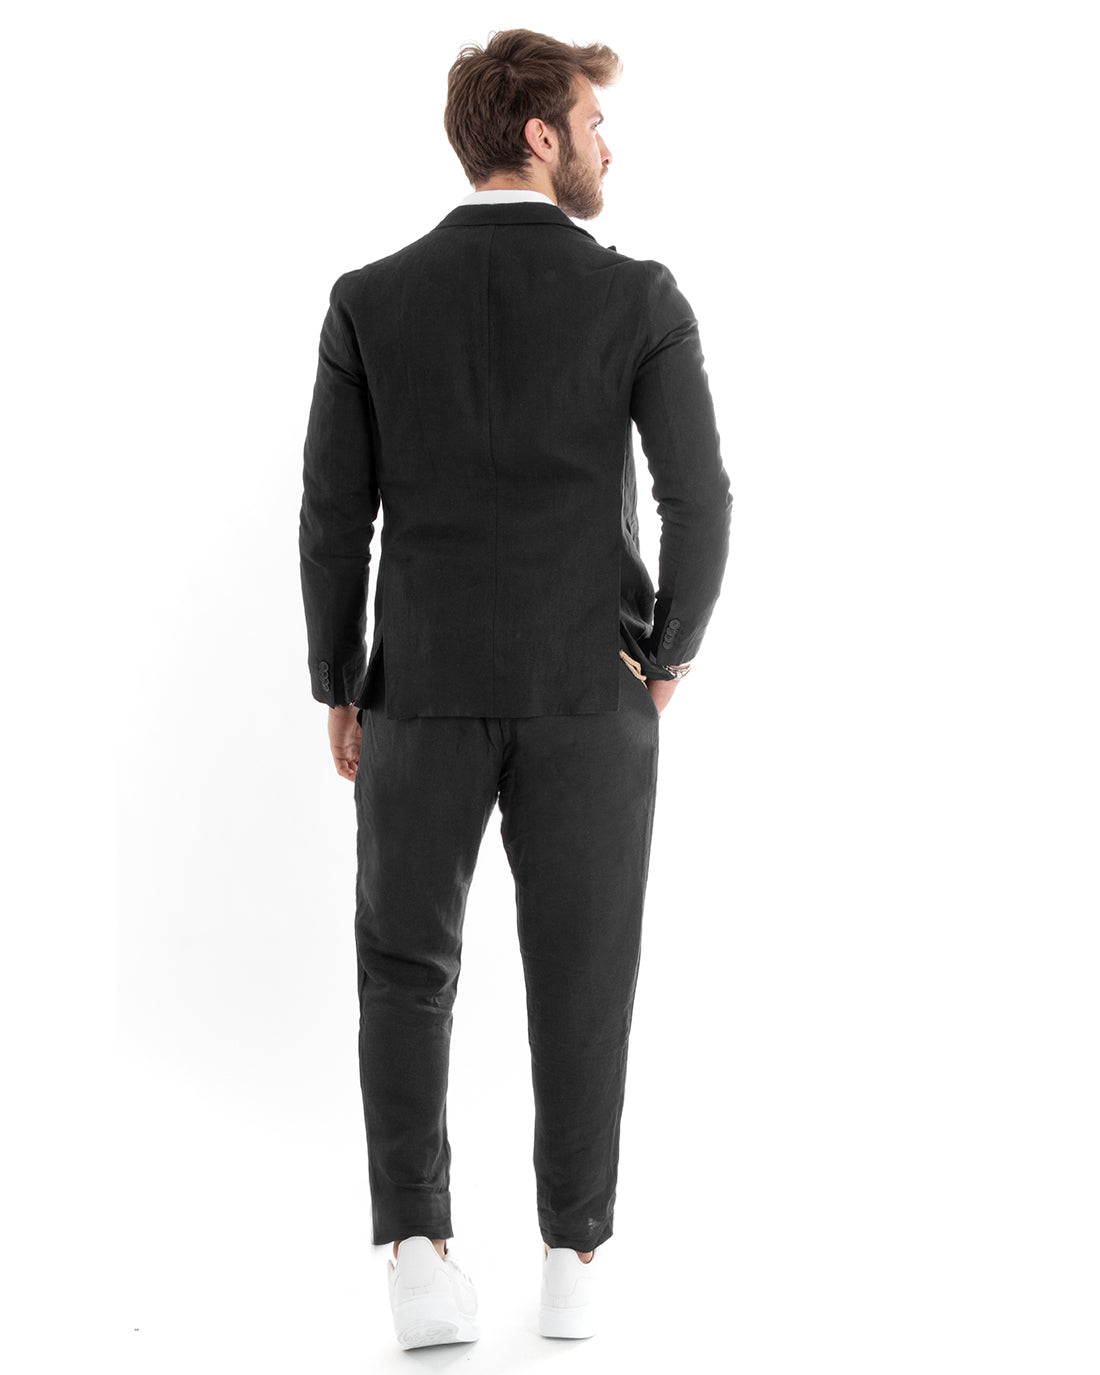 Double-breasted men's suit, tailored linen suit, jacket and trousers, plain black GIOSAL-OU2332A